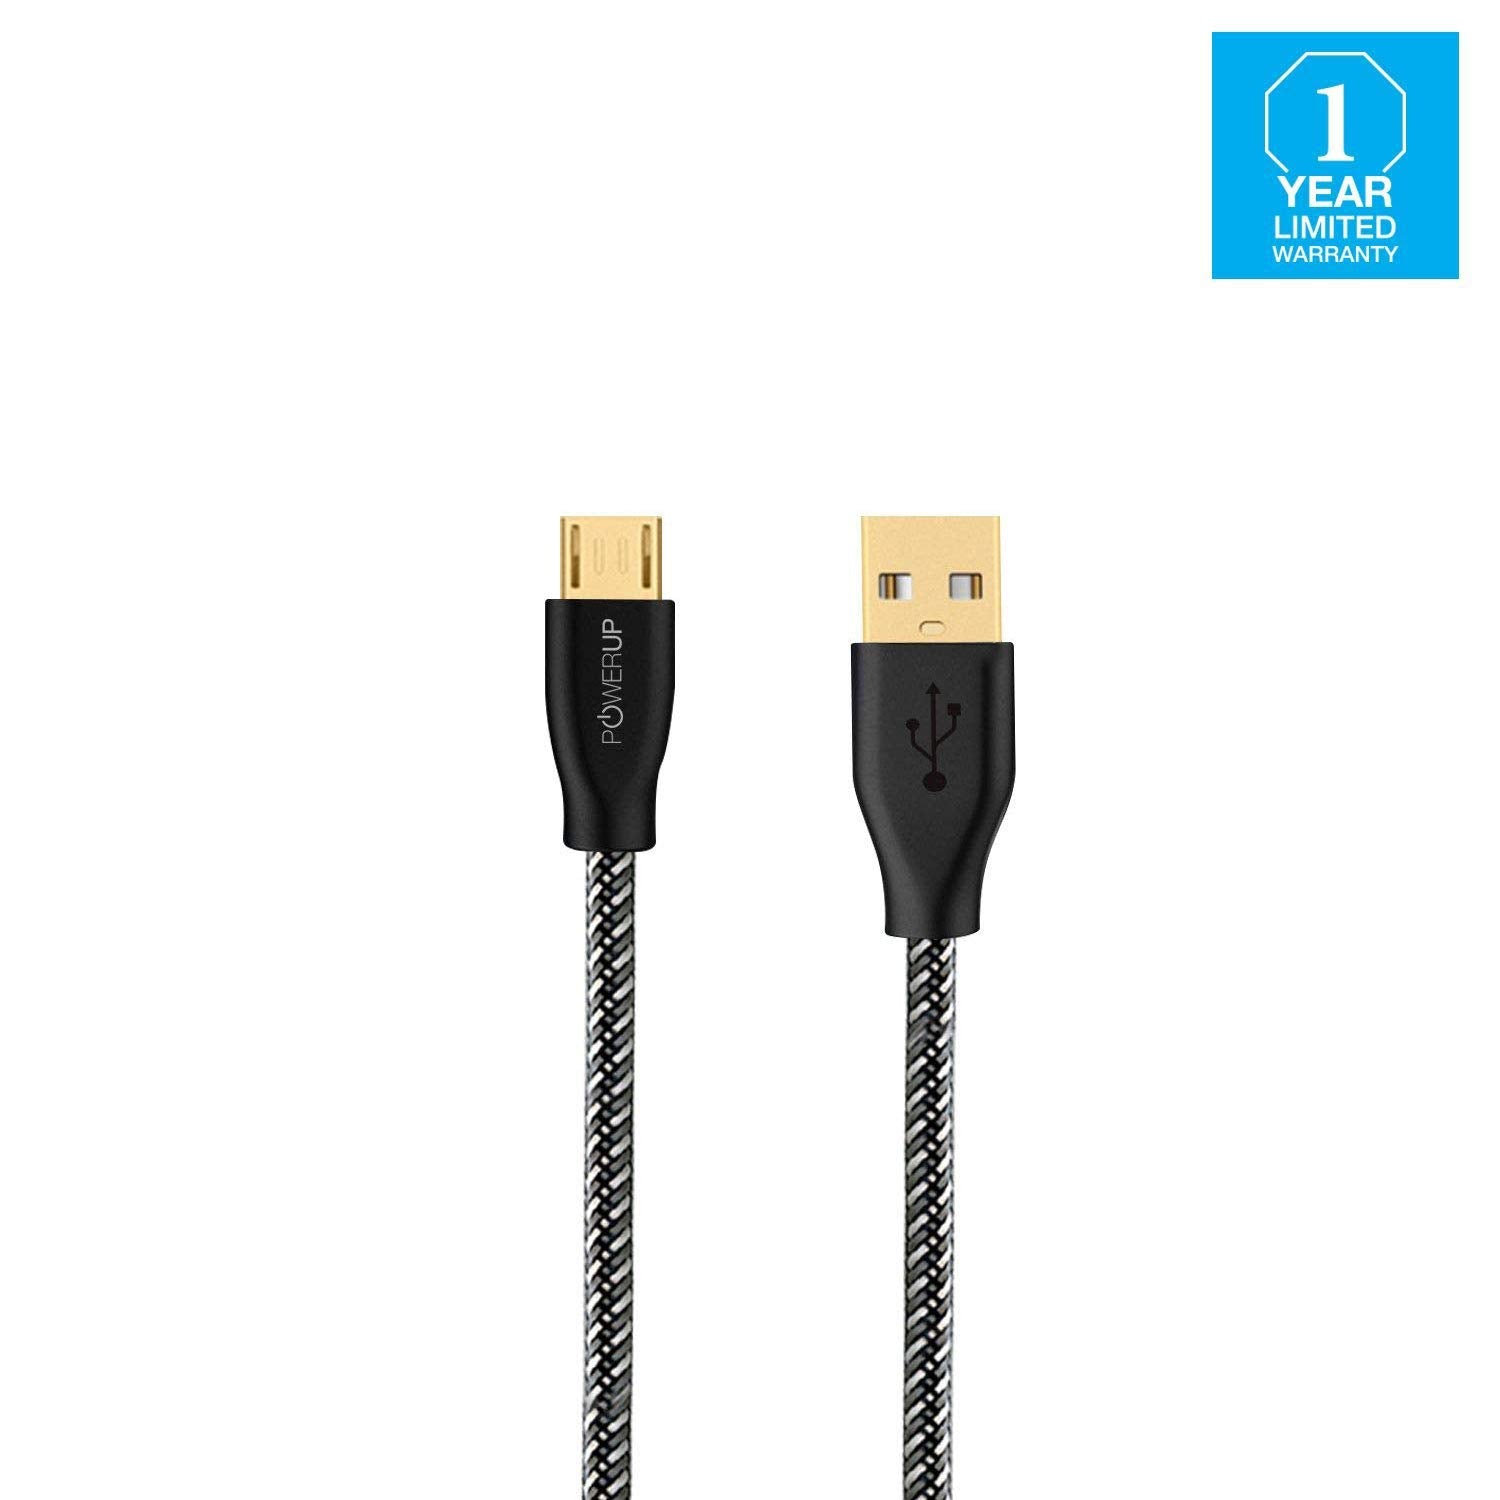 Powerup 1.5m Rubtough Micro-usb 2.4a Quick Charging Cable With 1 Year Warranty - Black